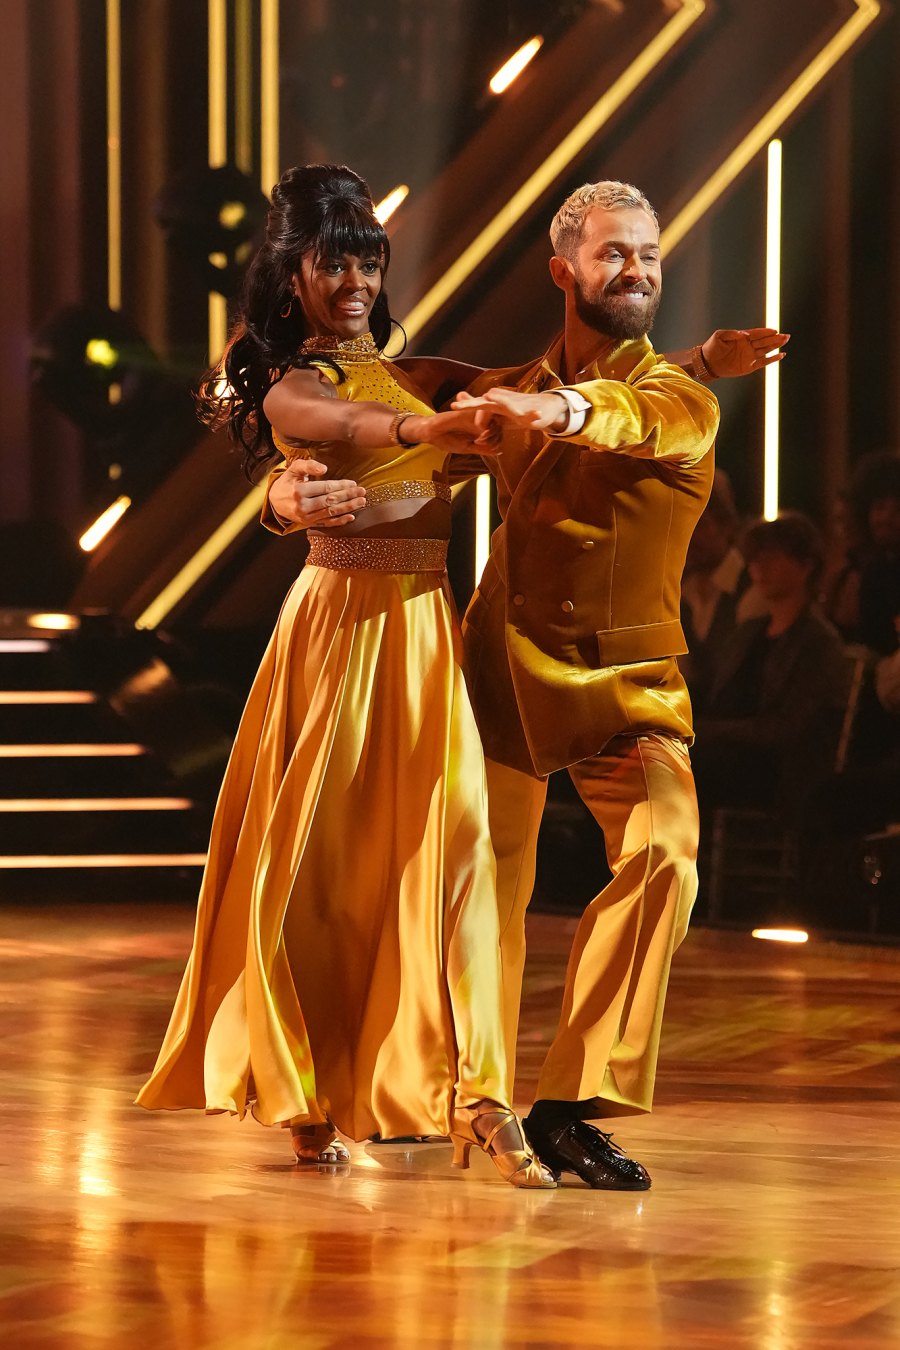 Charity Lawson and Artem Chigvintsev Which Duo Was Eliminated During Dancing With the Stars Motown Night